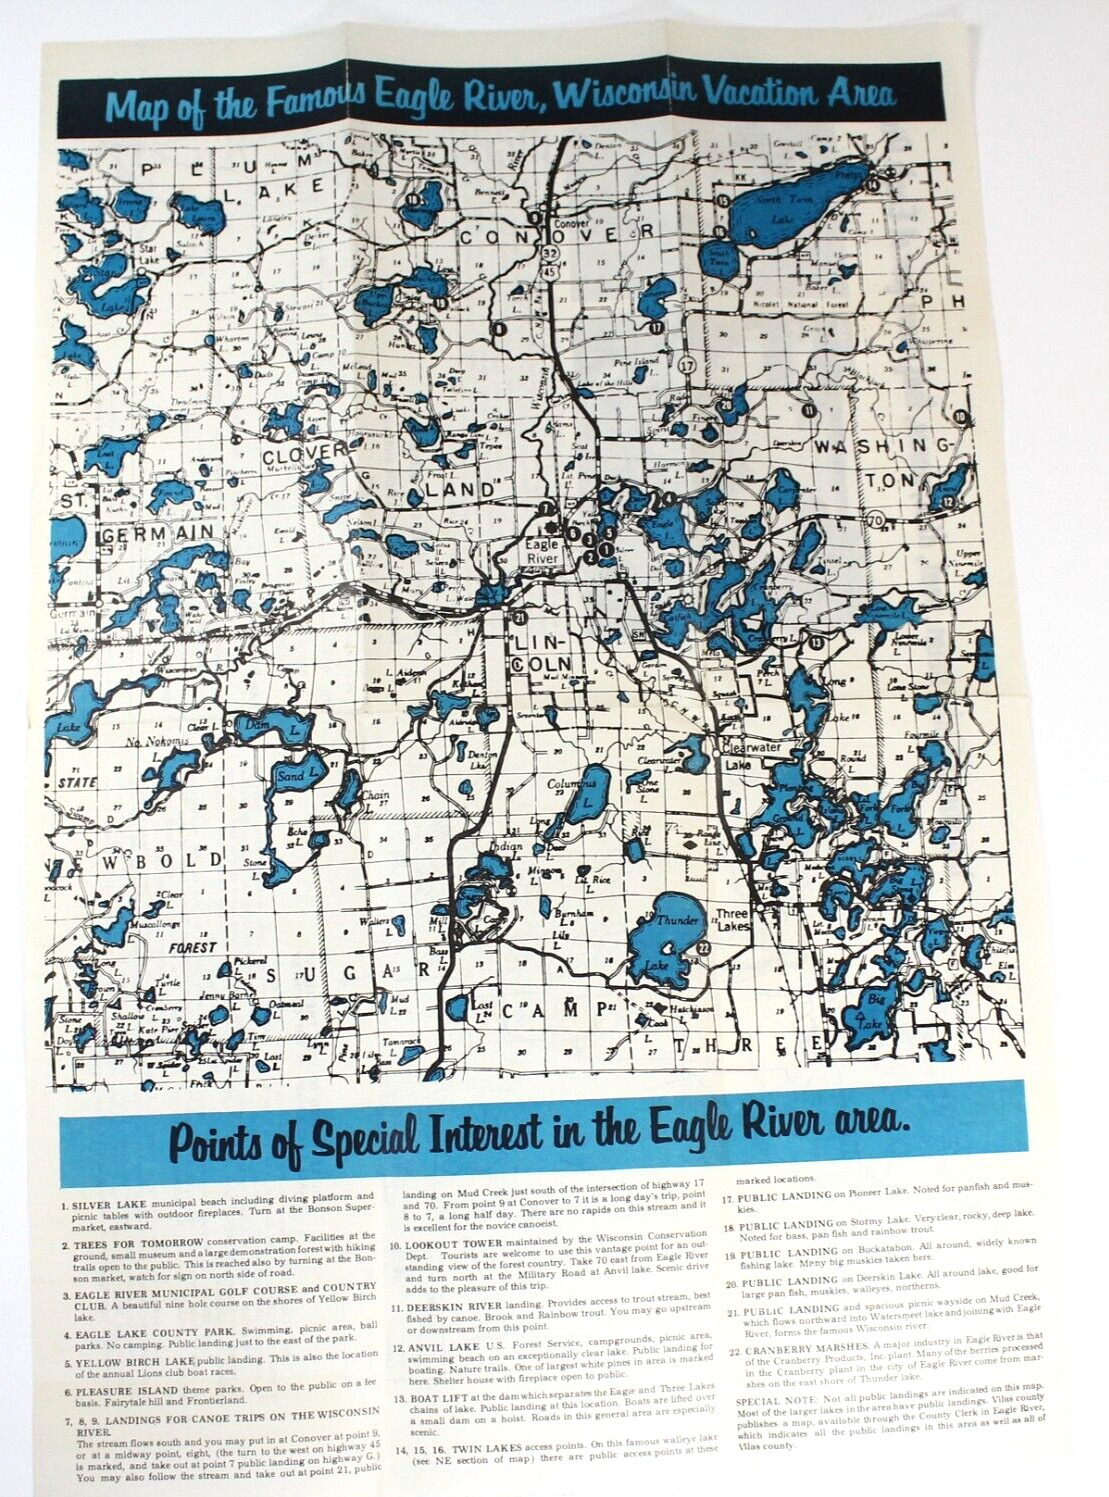 Vintage Eagle River Wisconsin Vacation Area Map and Points of Interest.